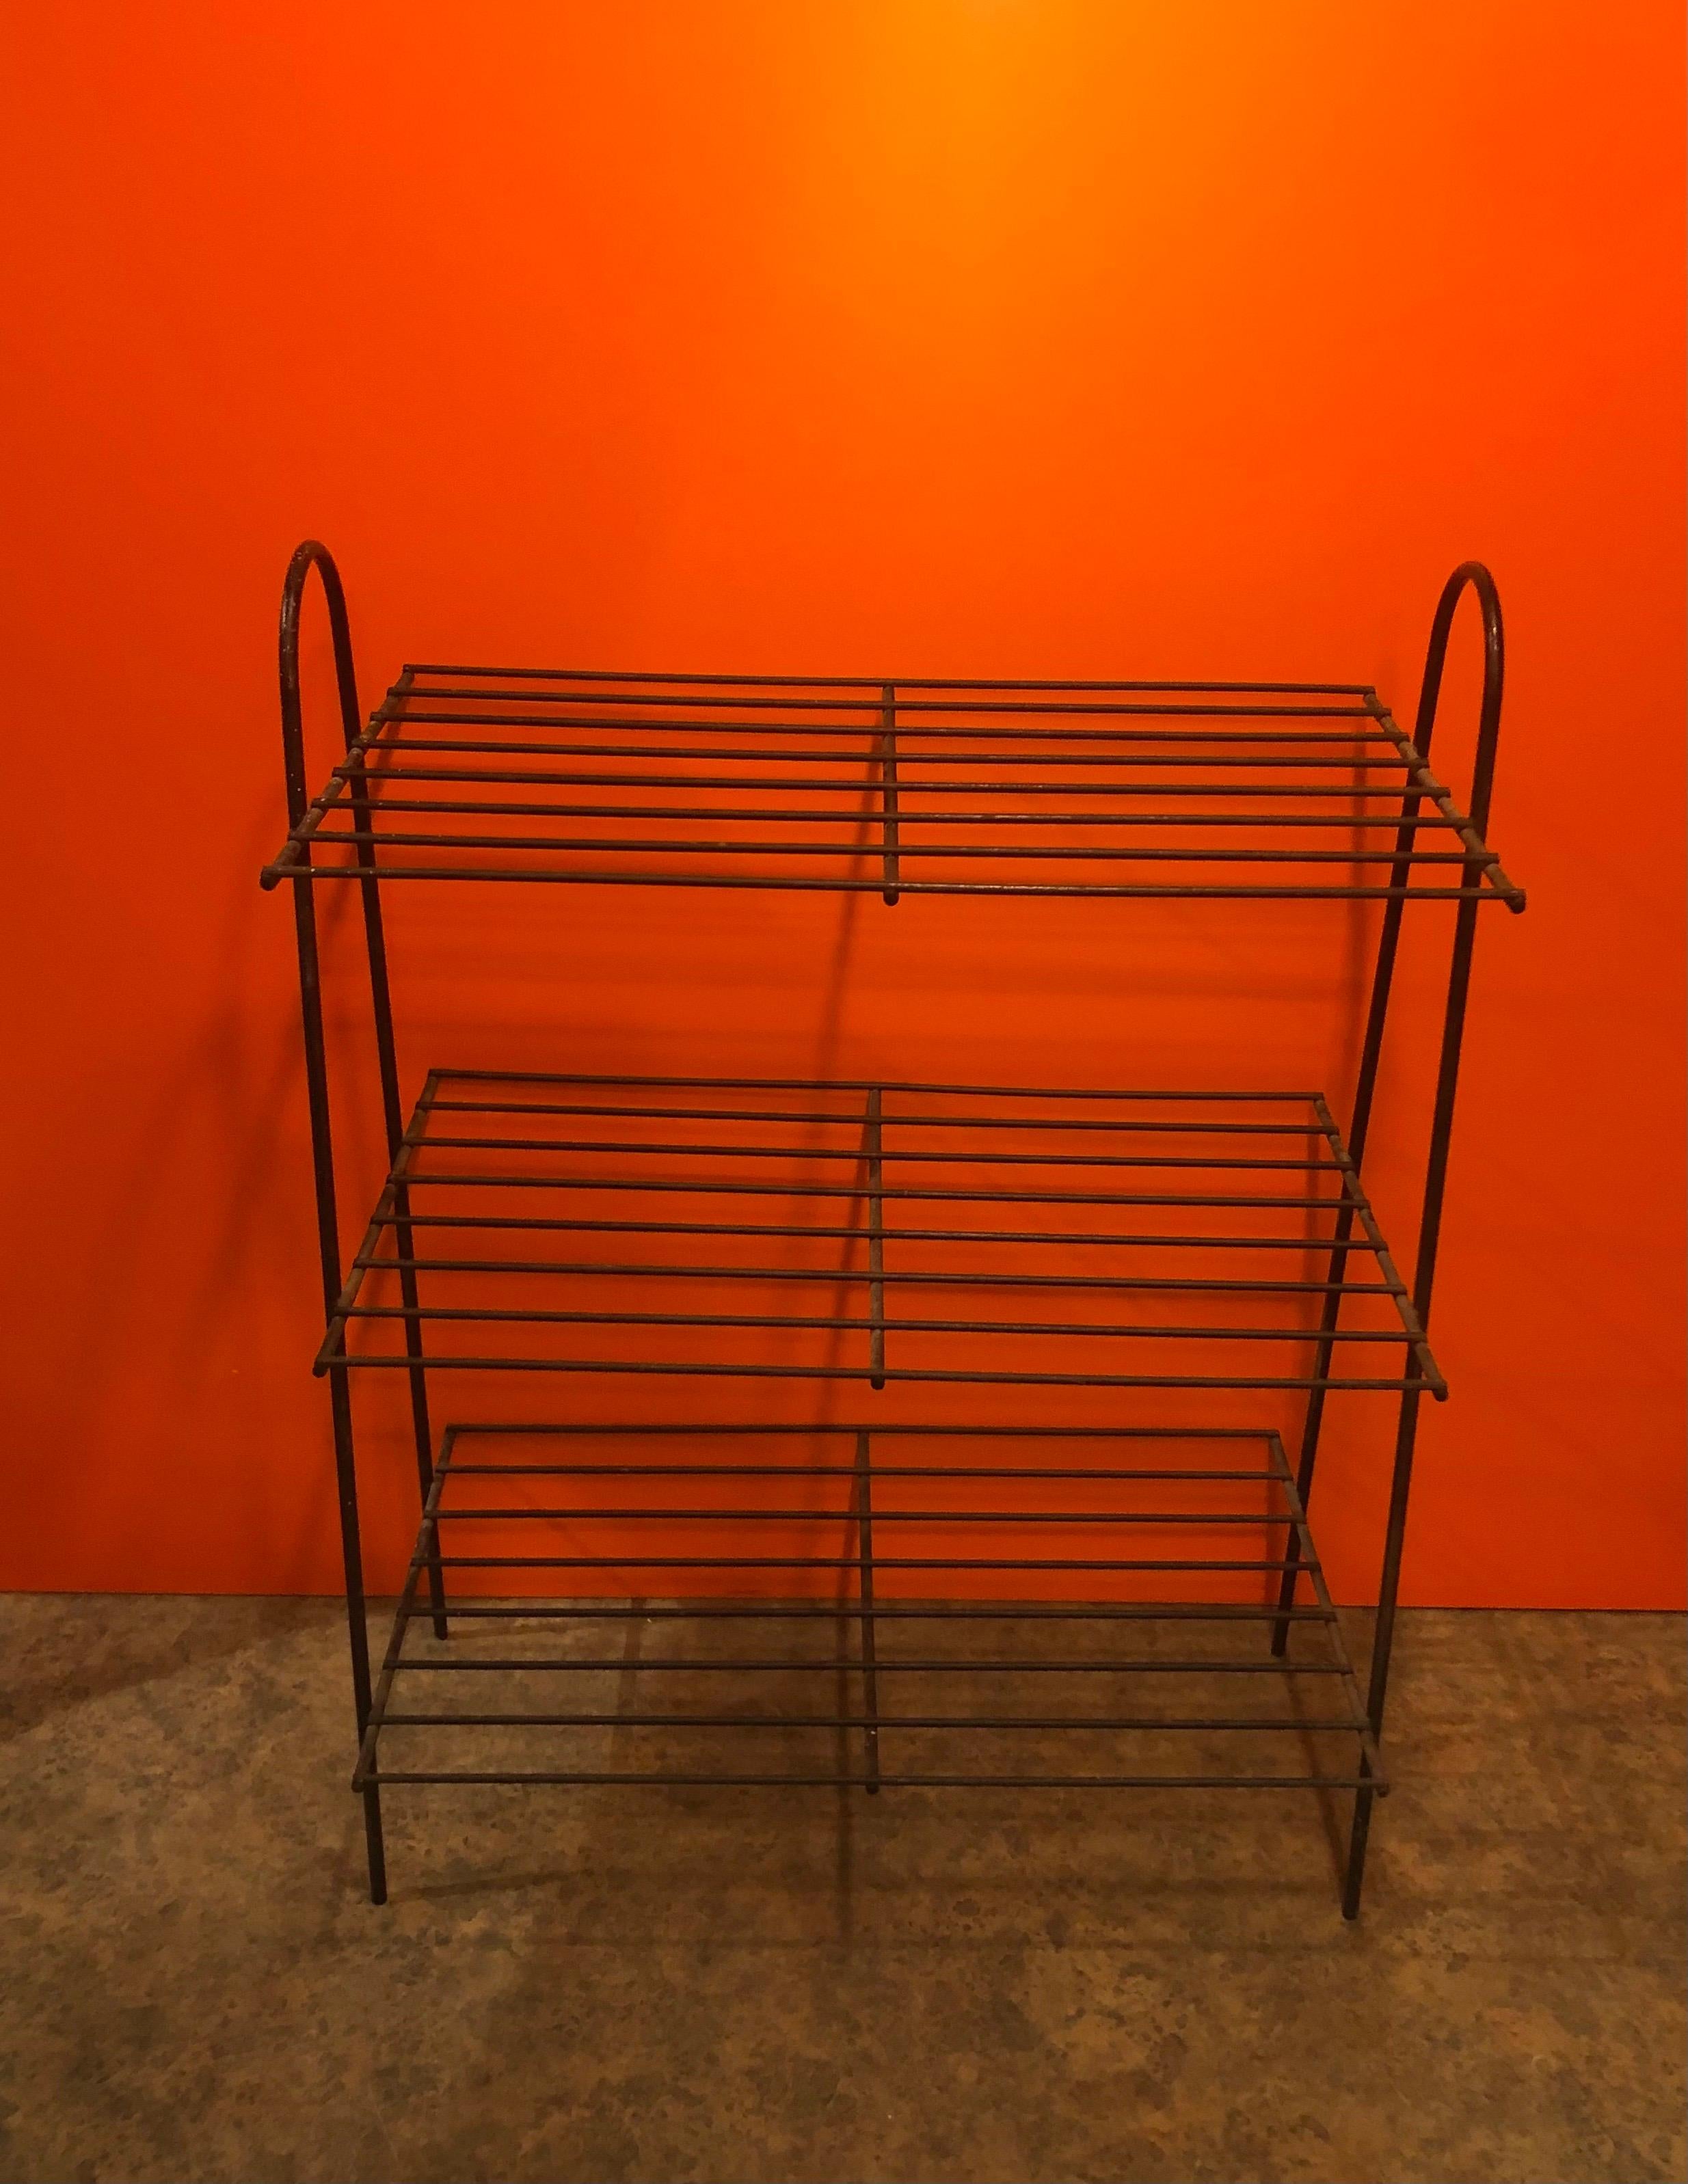 American Mid-Century Modern Atomic Iron Wire Book Shelf or Rack For Sale